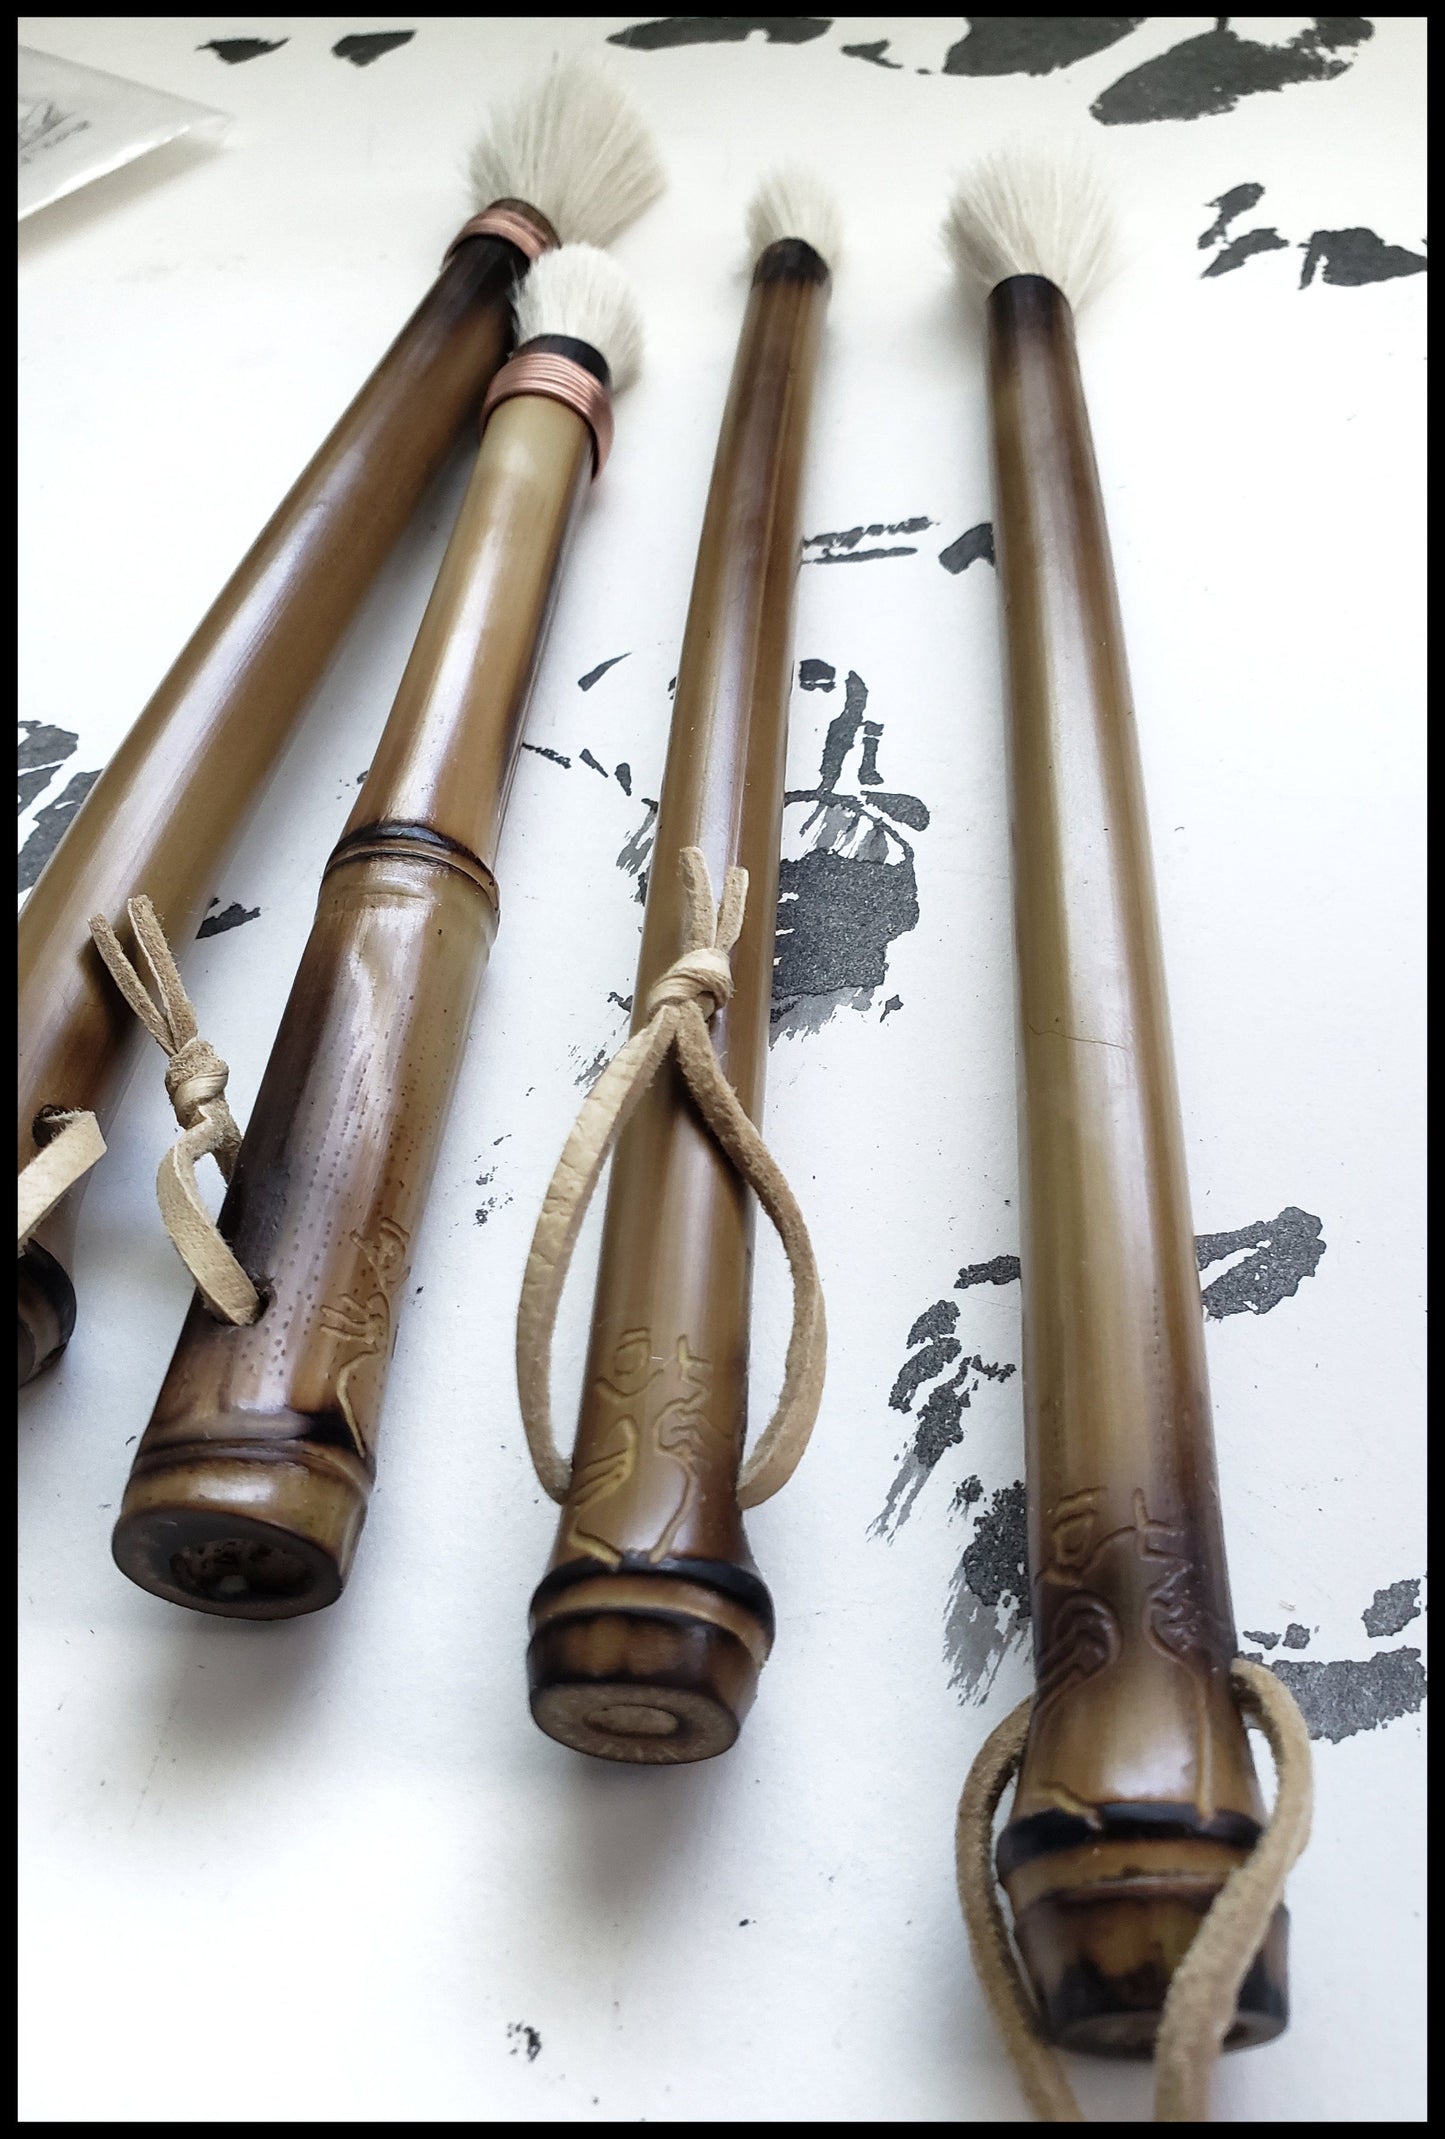 Sumi-e Brushes with Bamboo Handles and Goat or Horsehair Bristles - Elizabeth Schowachert Art